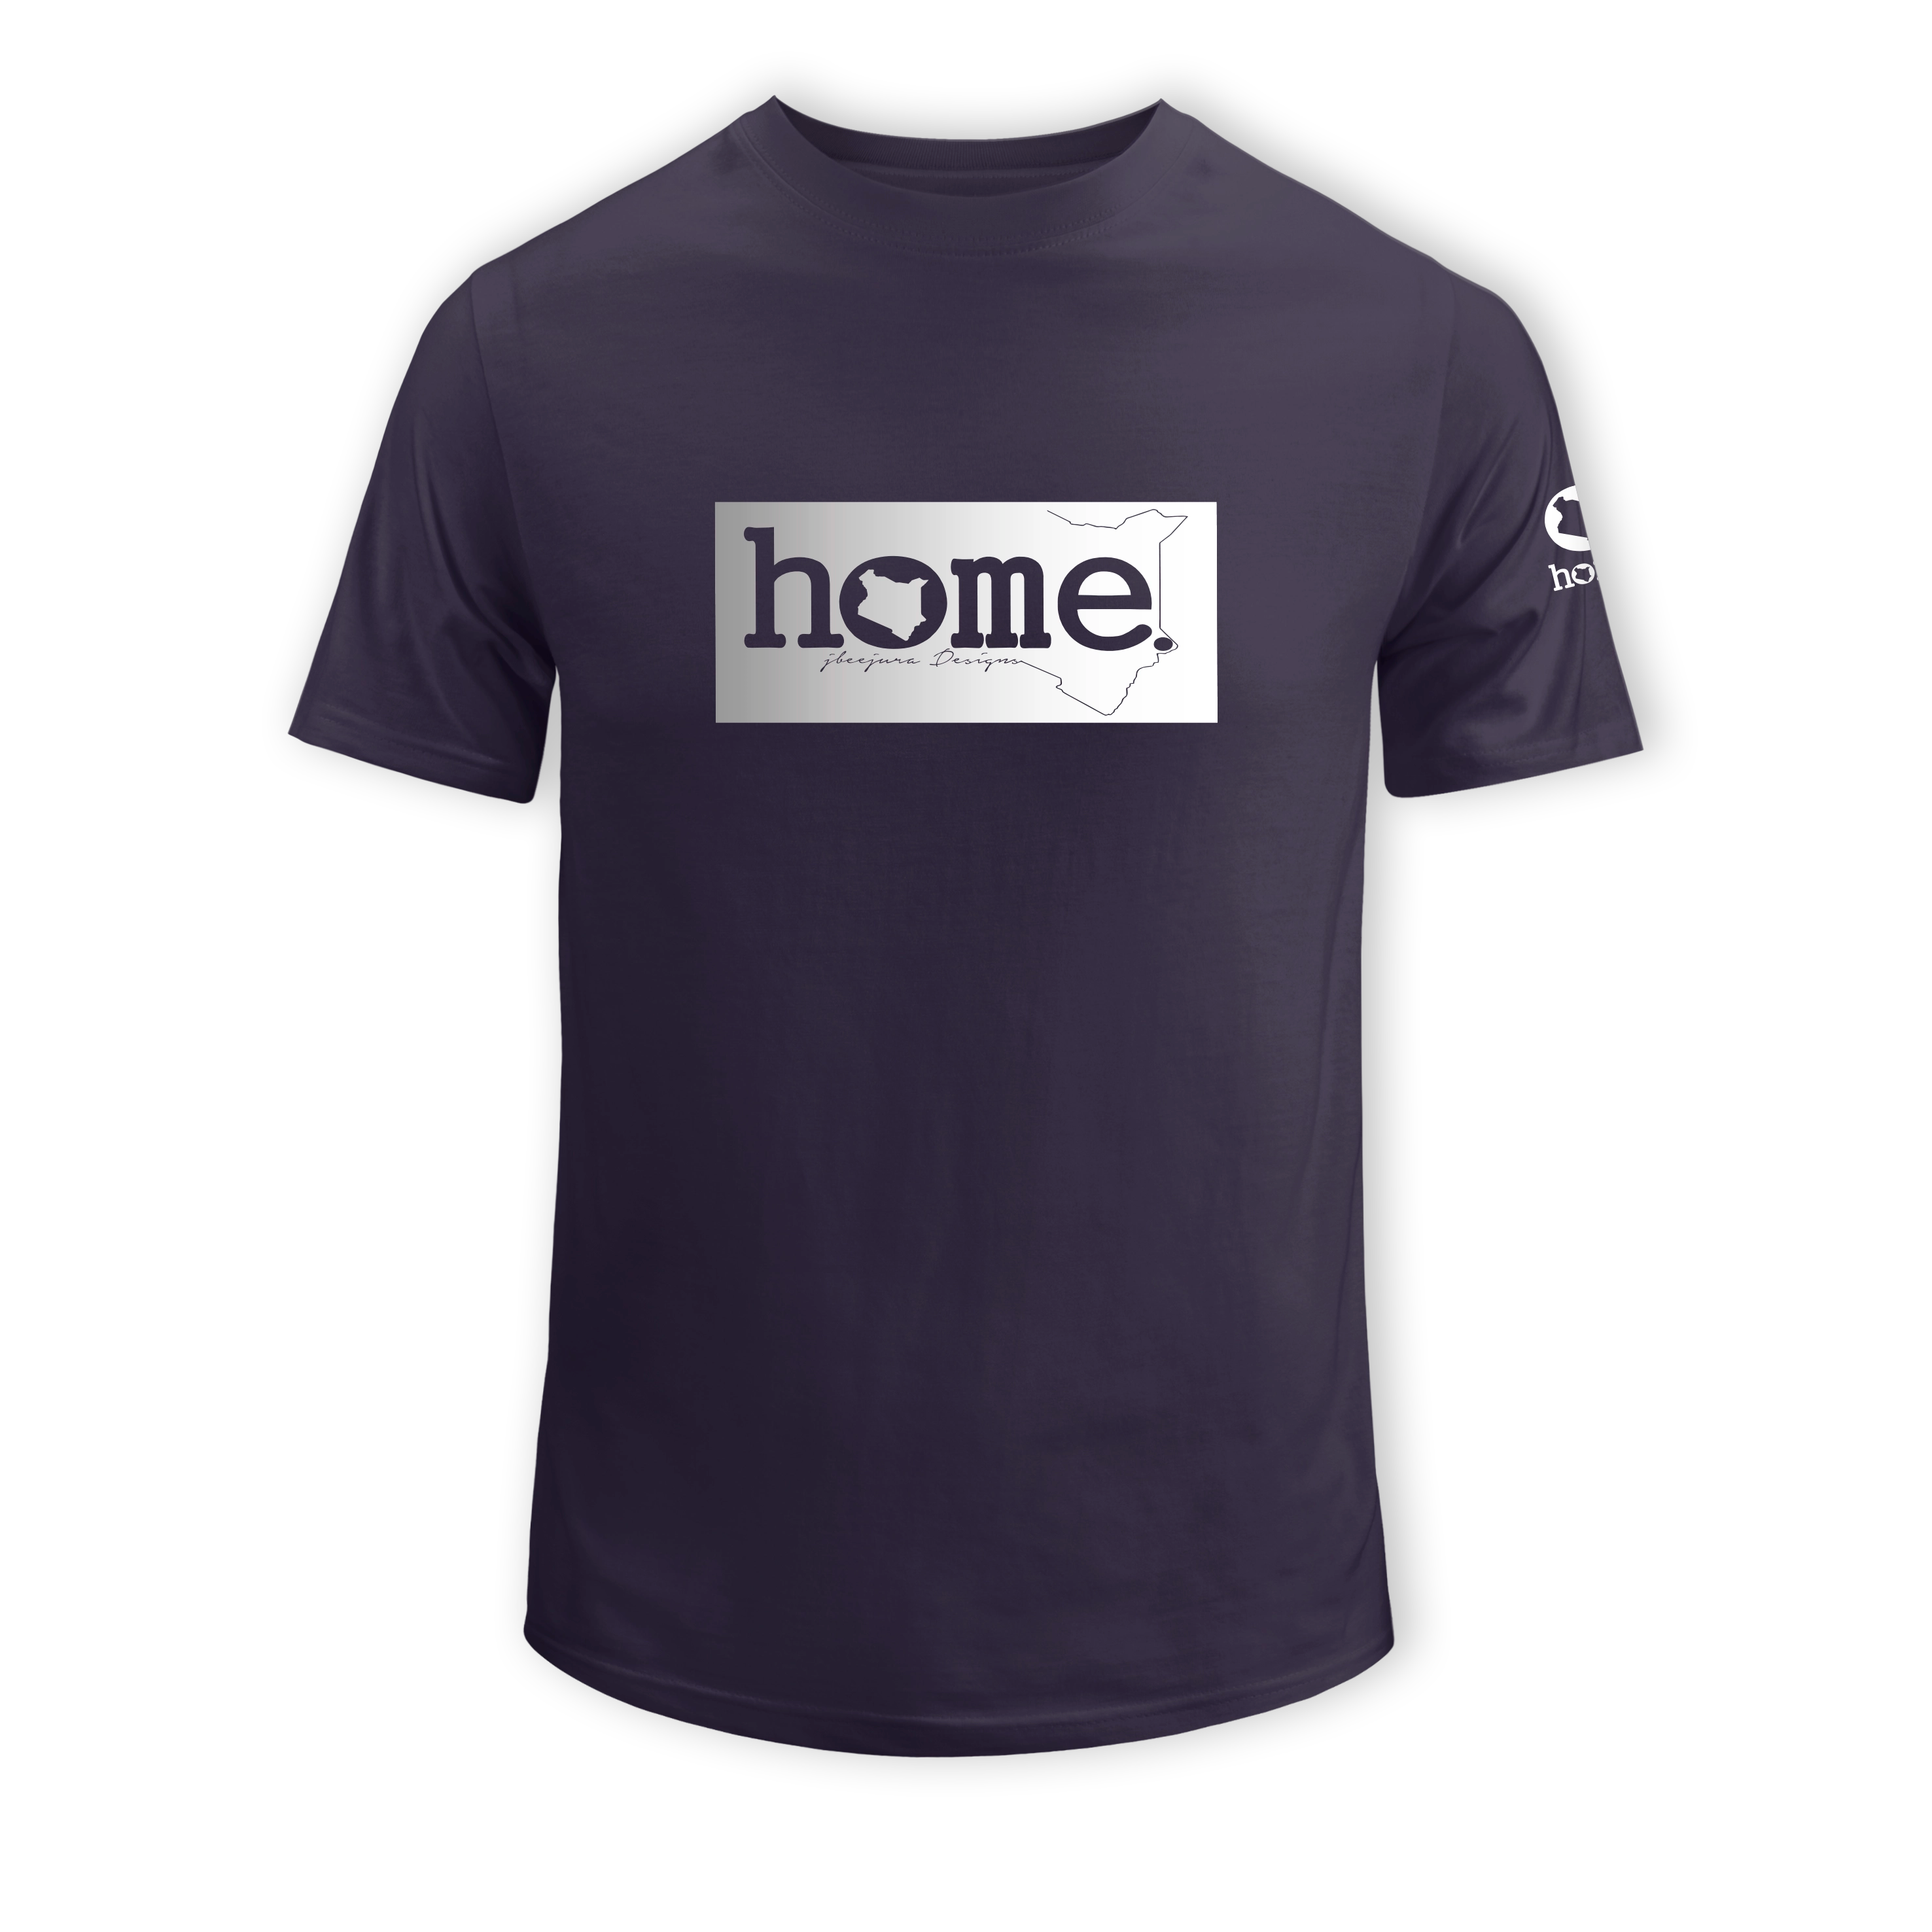 home_254 KIDS SHORT-SLEEVED RICH PURPLE T-SHIRT WITH A SILVER CLASSIC PRINT – COTTON PLUS FABRIC